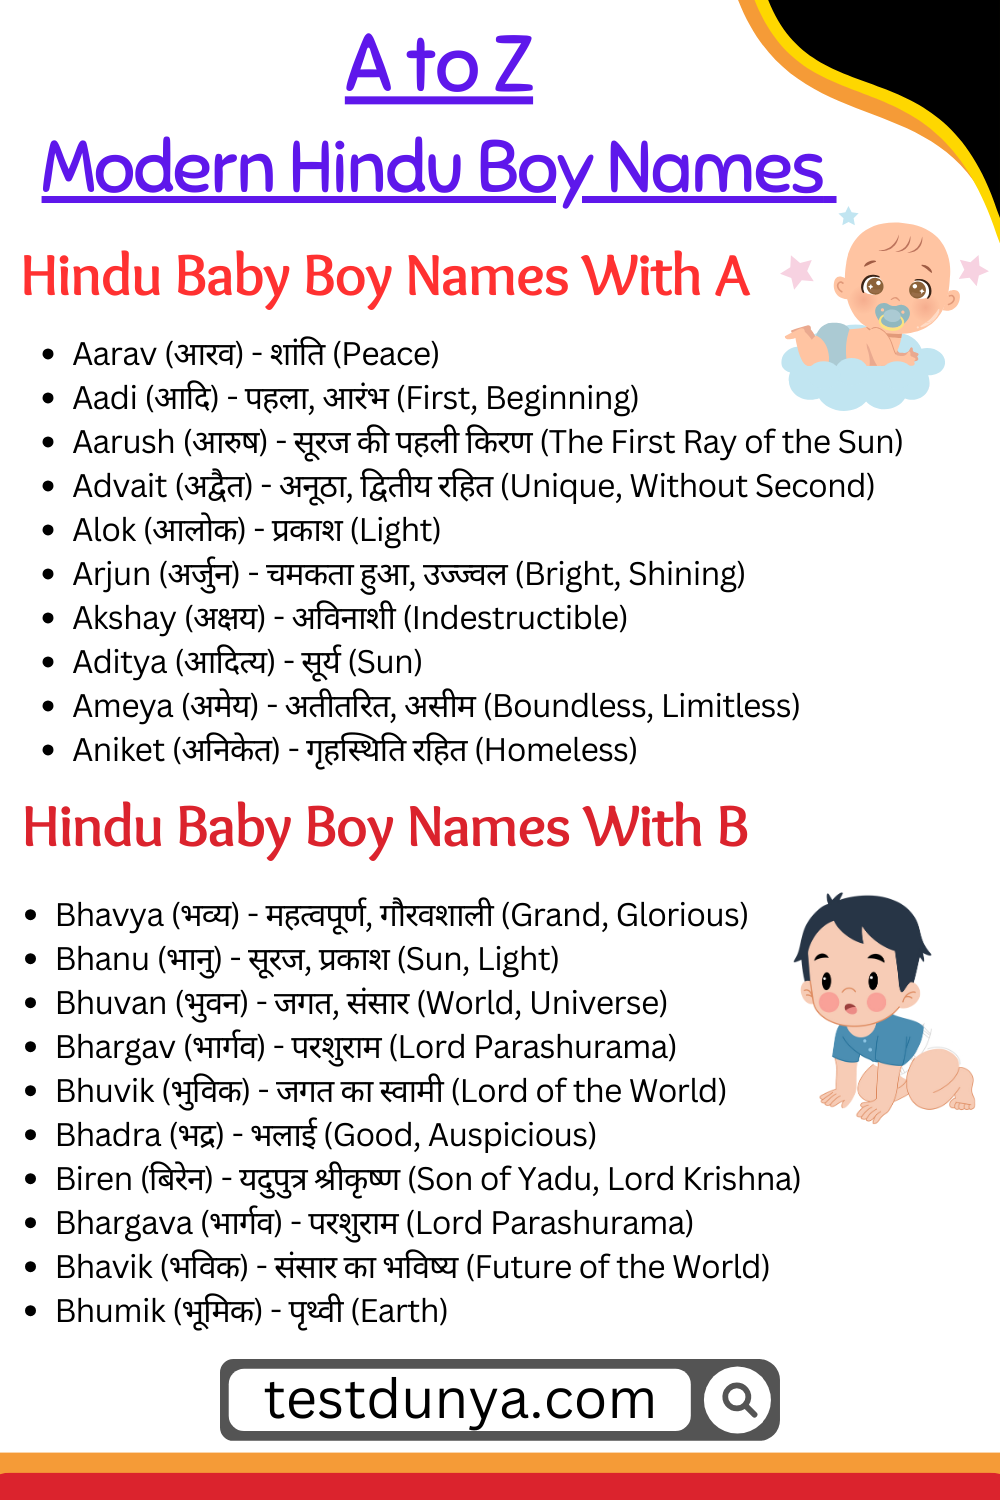 Modern Hindu Baby Boy Names A to Z with Meanings